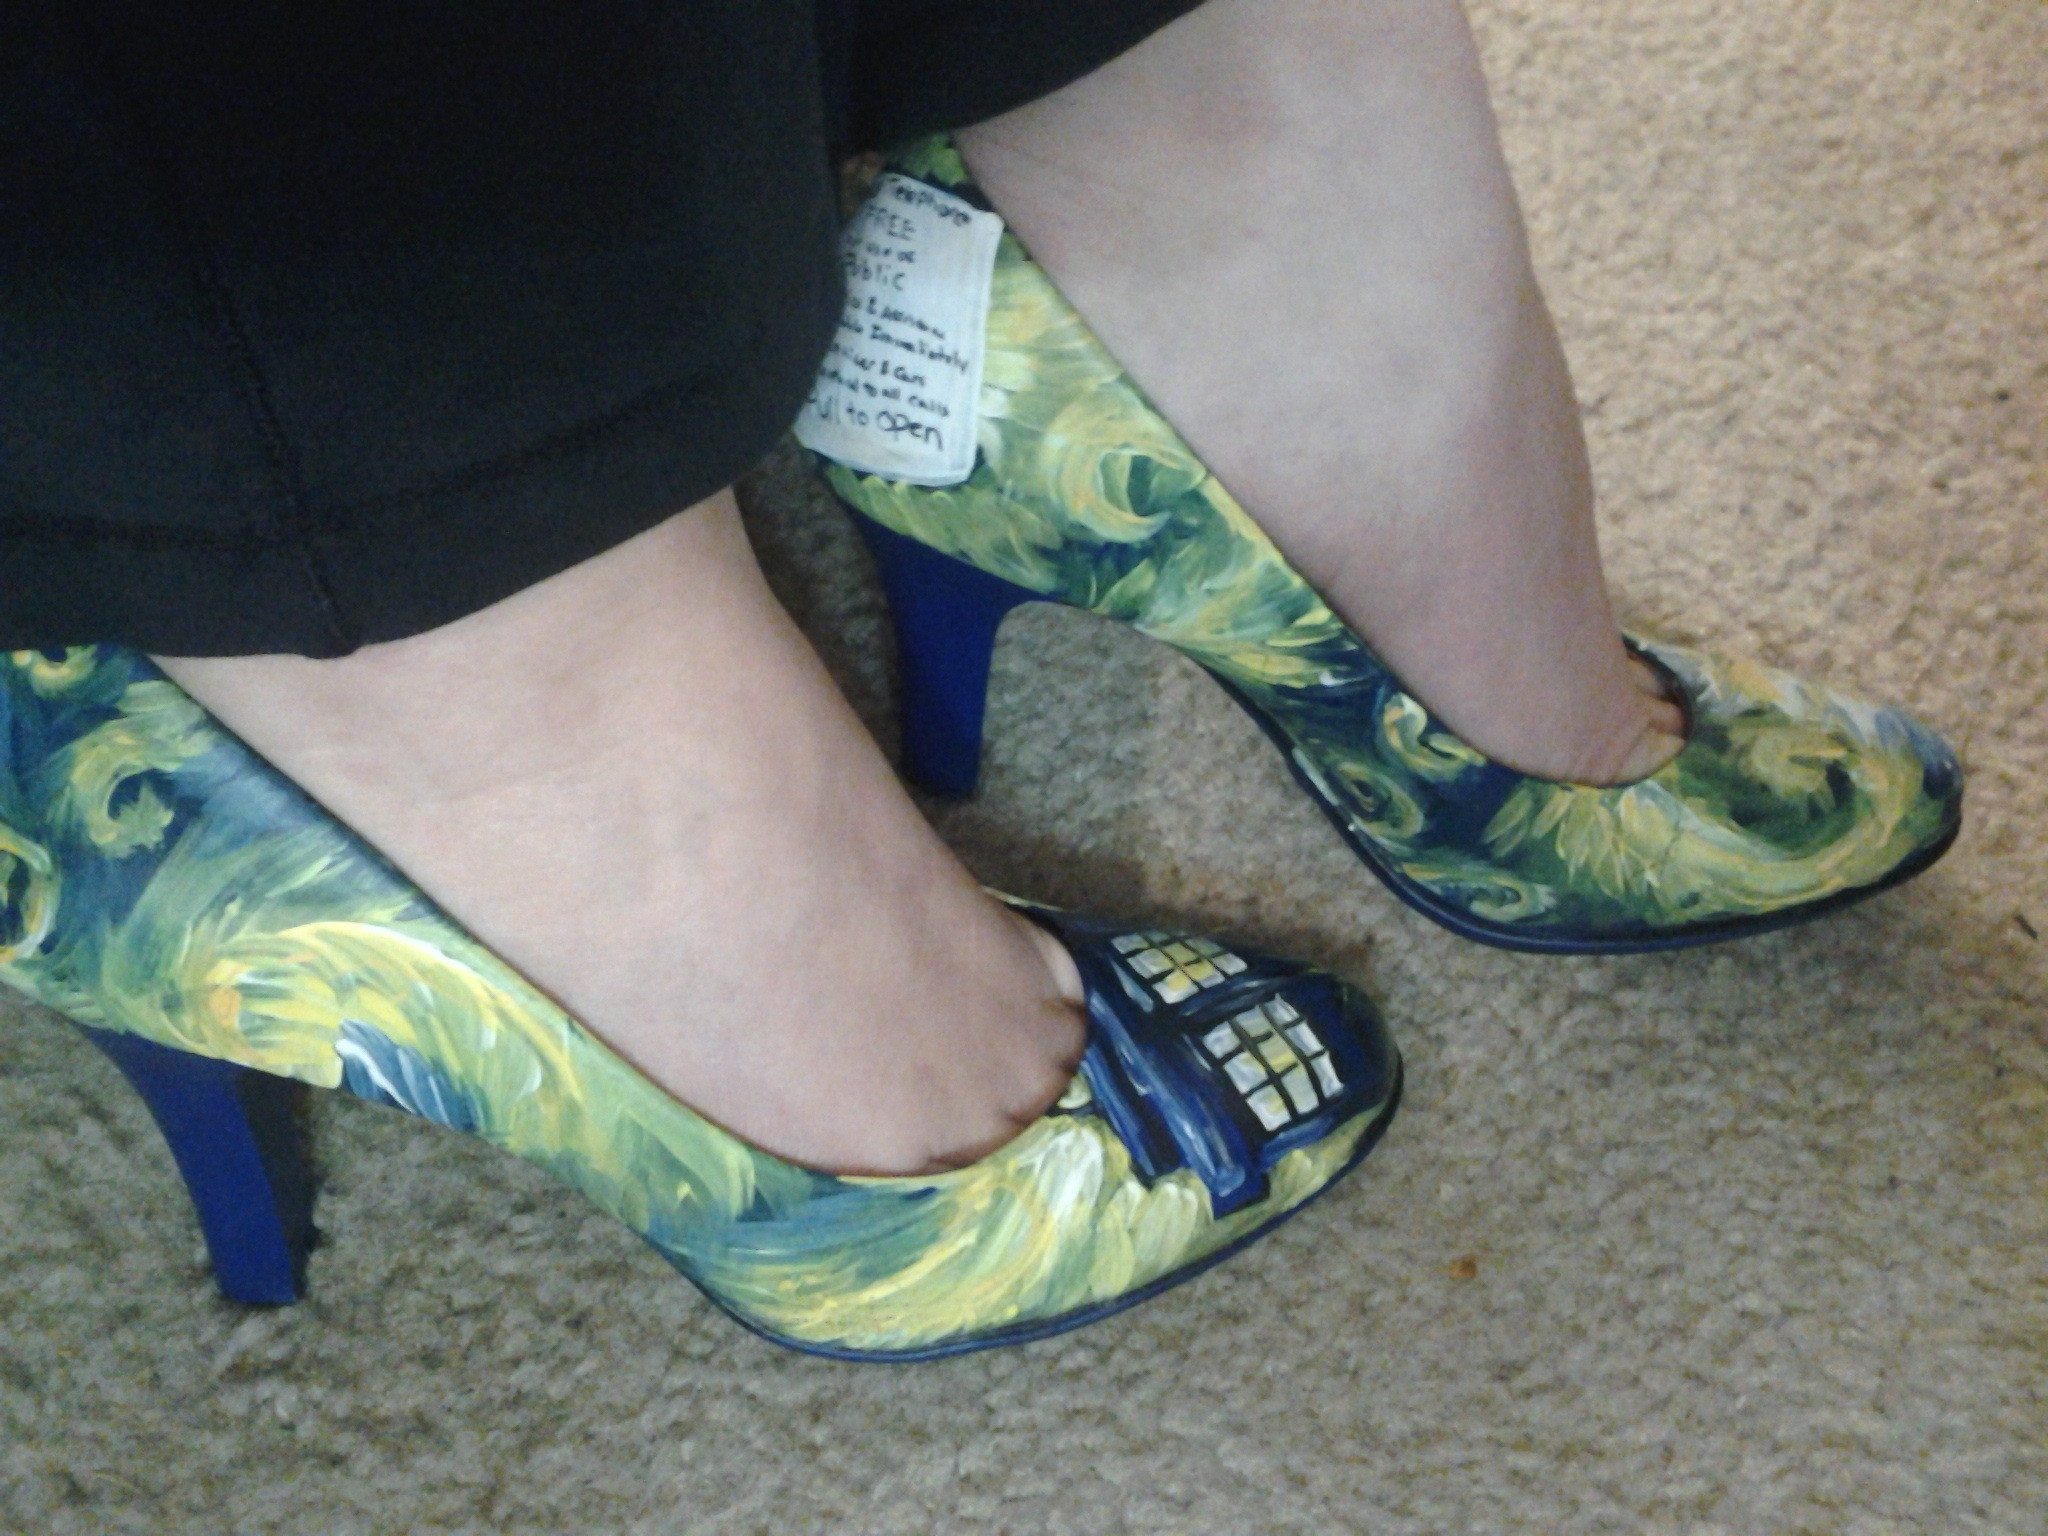 2048x1536 The van Gogh Exploding TARDIS shoes I ordered finally came in!